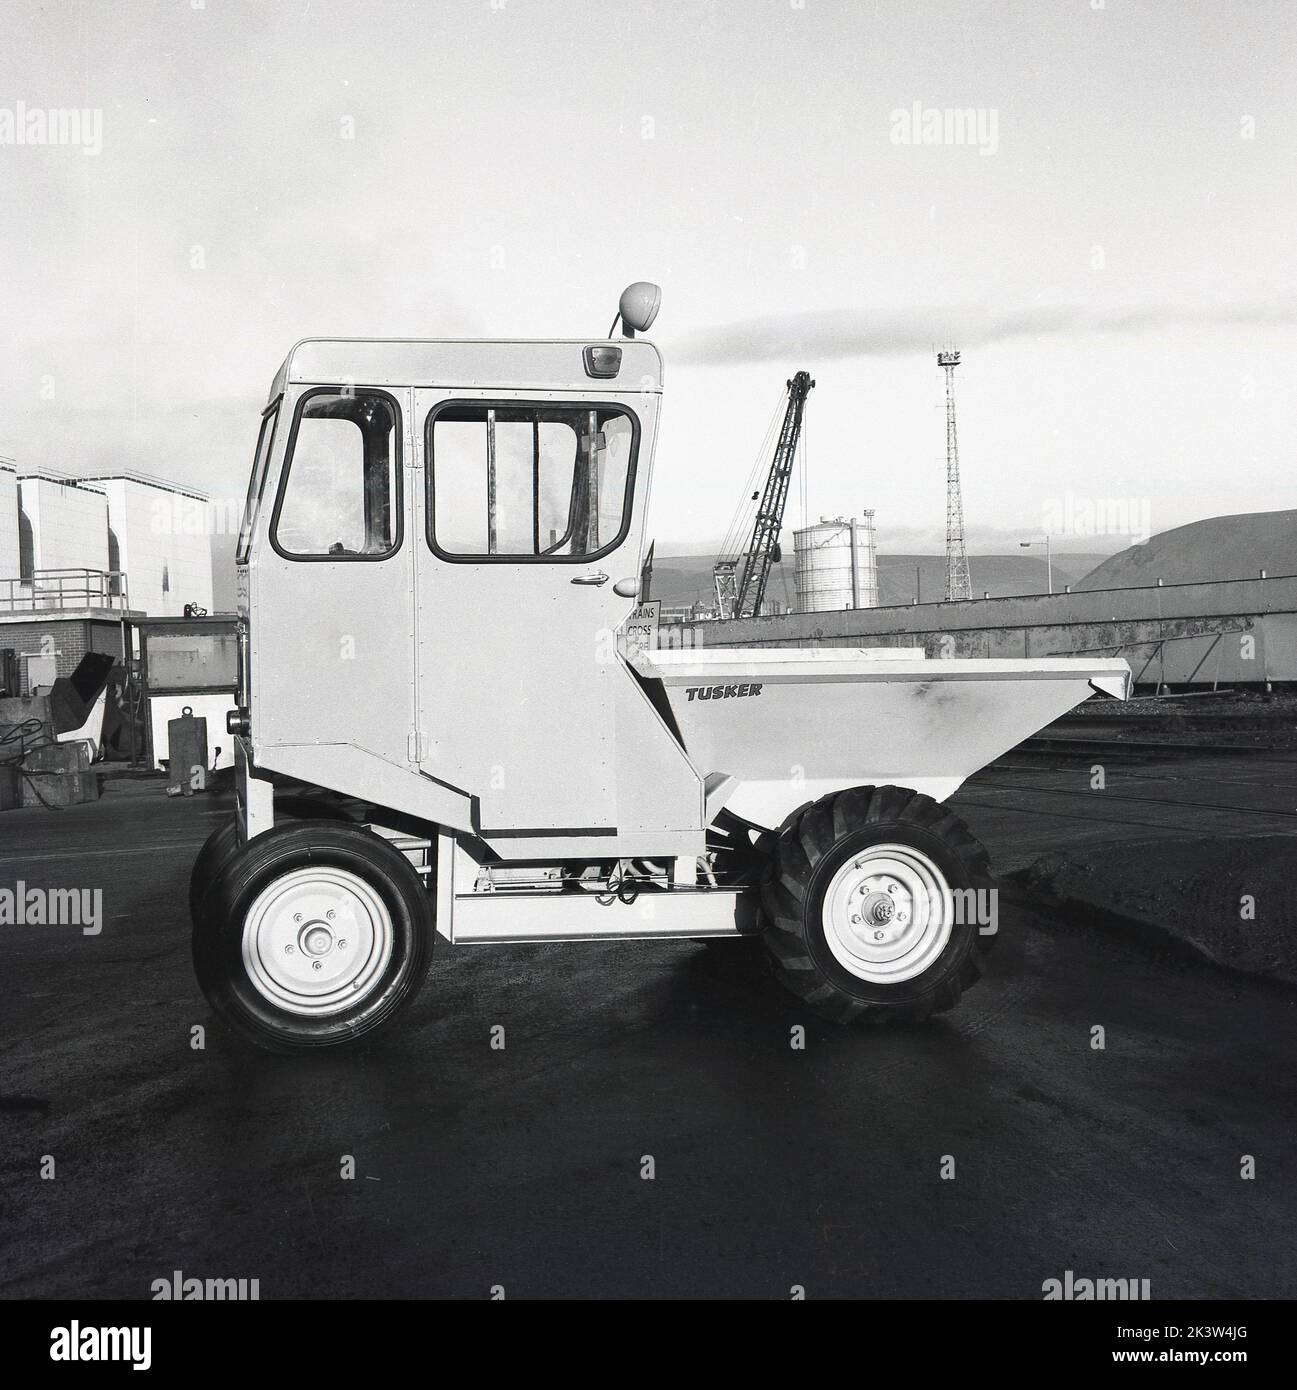 1950s, historical, side view of a mini back or reverse dumper truck, with cabin, on site at the Steelworks at Abbey Works, Port Talbot, Wales, UK. The British company Thwaites designed and manufactured the very first site dumper,  a 15 cwt-capacity, two-wheel drive, reverse tip machine. Stock Photo